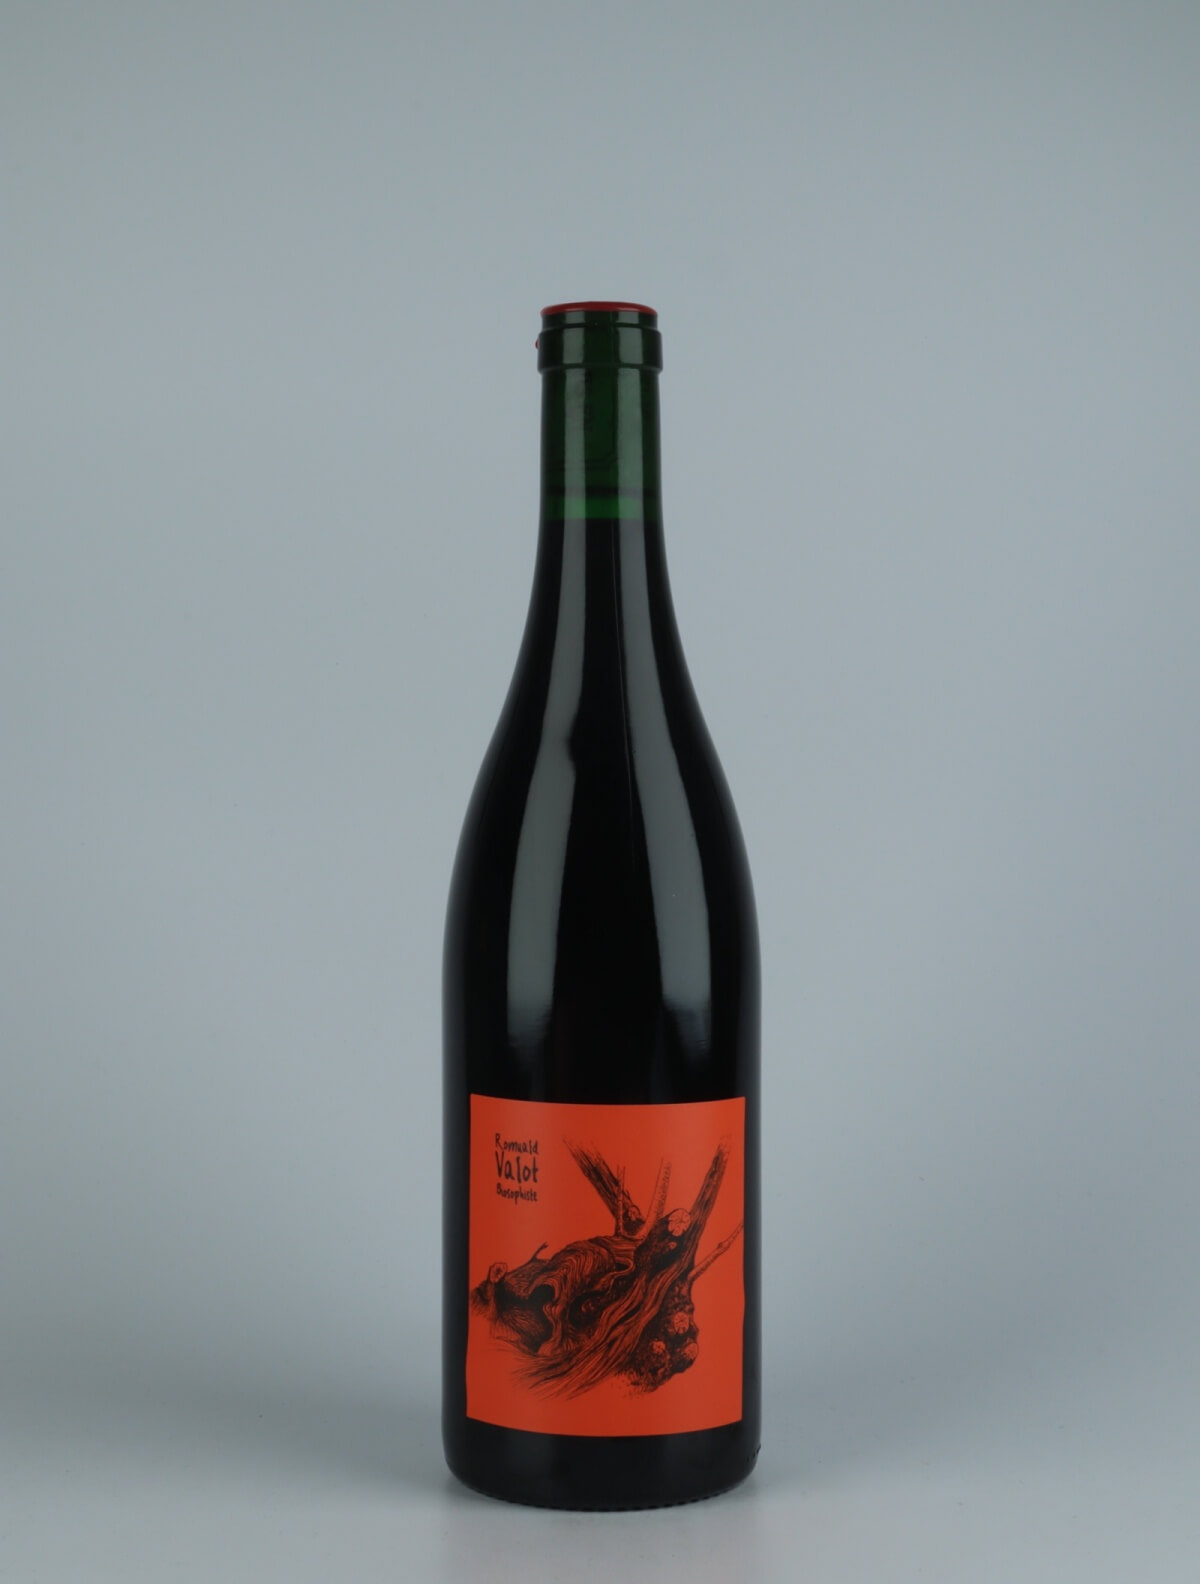 A bottle 2020 Chénas Red wine from , Beaujolais in France